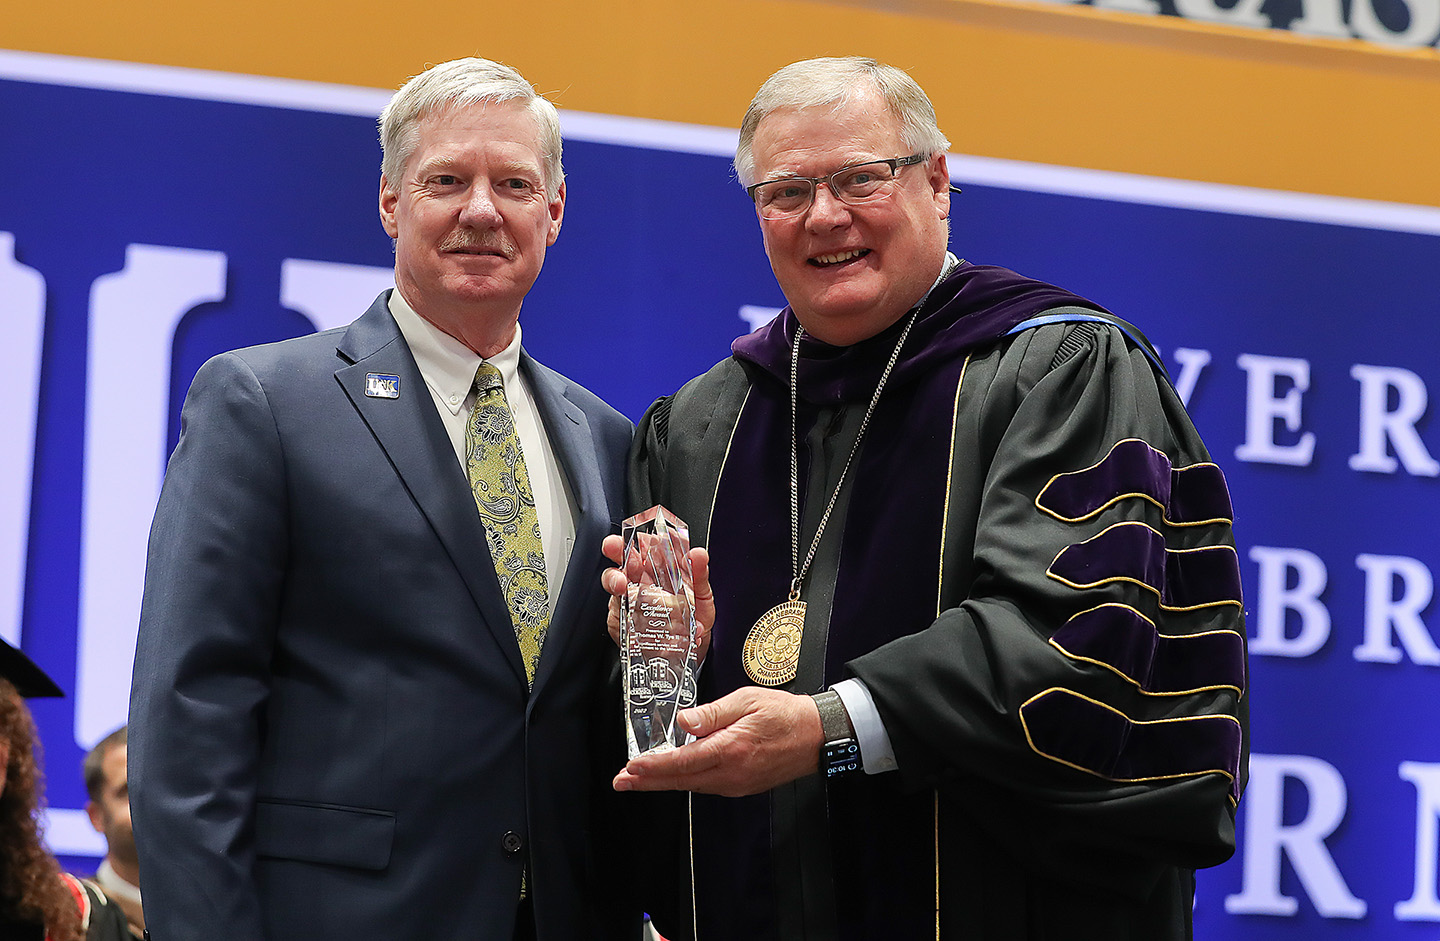 Tom Tye, left, receives the Ron and Carol Cope Cornerstone of Excellence Award from UNK Chancellor Doug Kristensen during Friday’s spring commencement ceremony. (Photos by Erika Pritchard, UNK Communications)